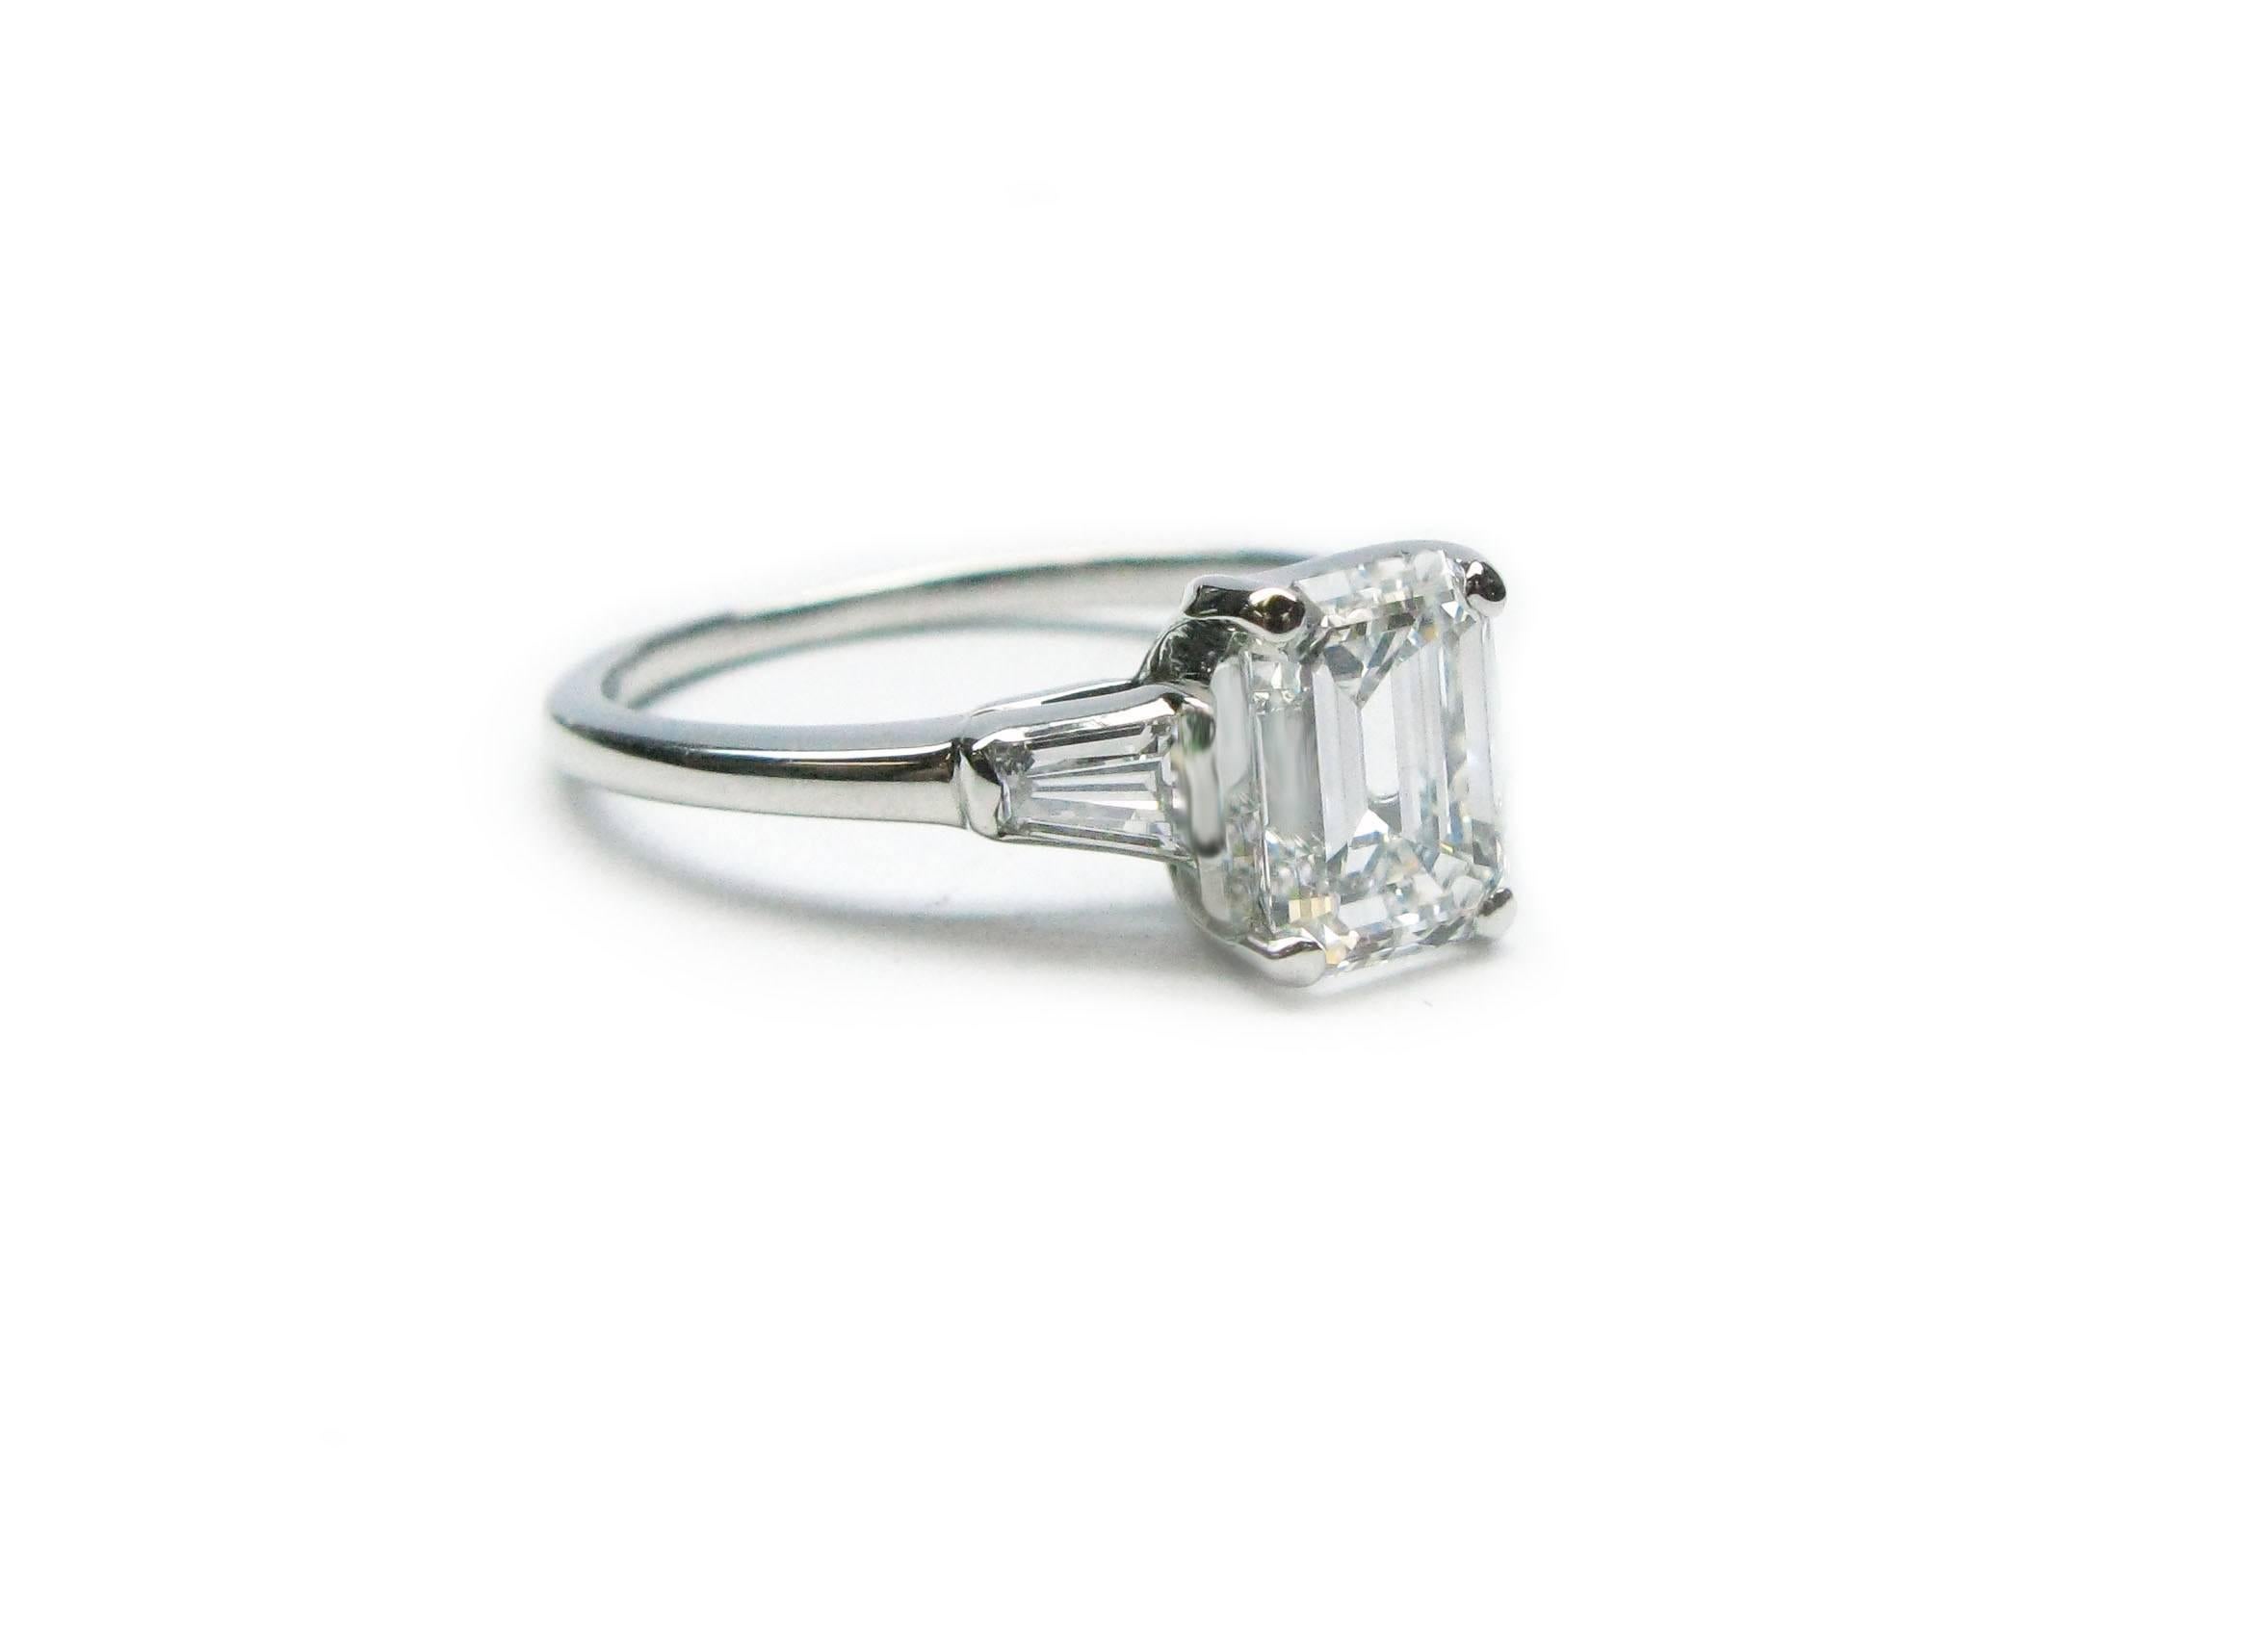 This lovely handmade platinum engagement ring features a GIA certified 1.54ct, E color, SI1 clarity, Emerald cut diamond with approximately 0.40ctw tapered baguette diamond sidestones. This timeless ring is meant for one special girl!